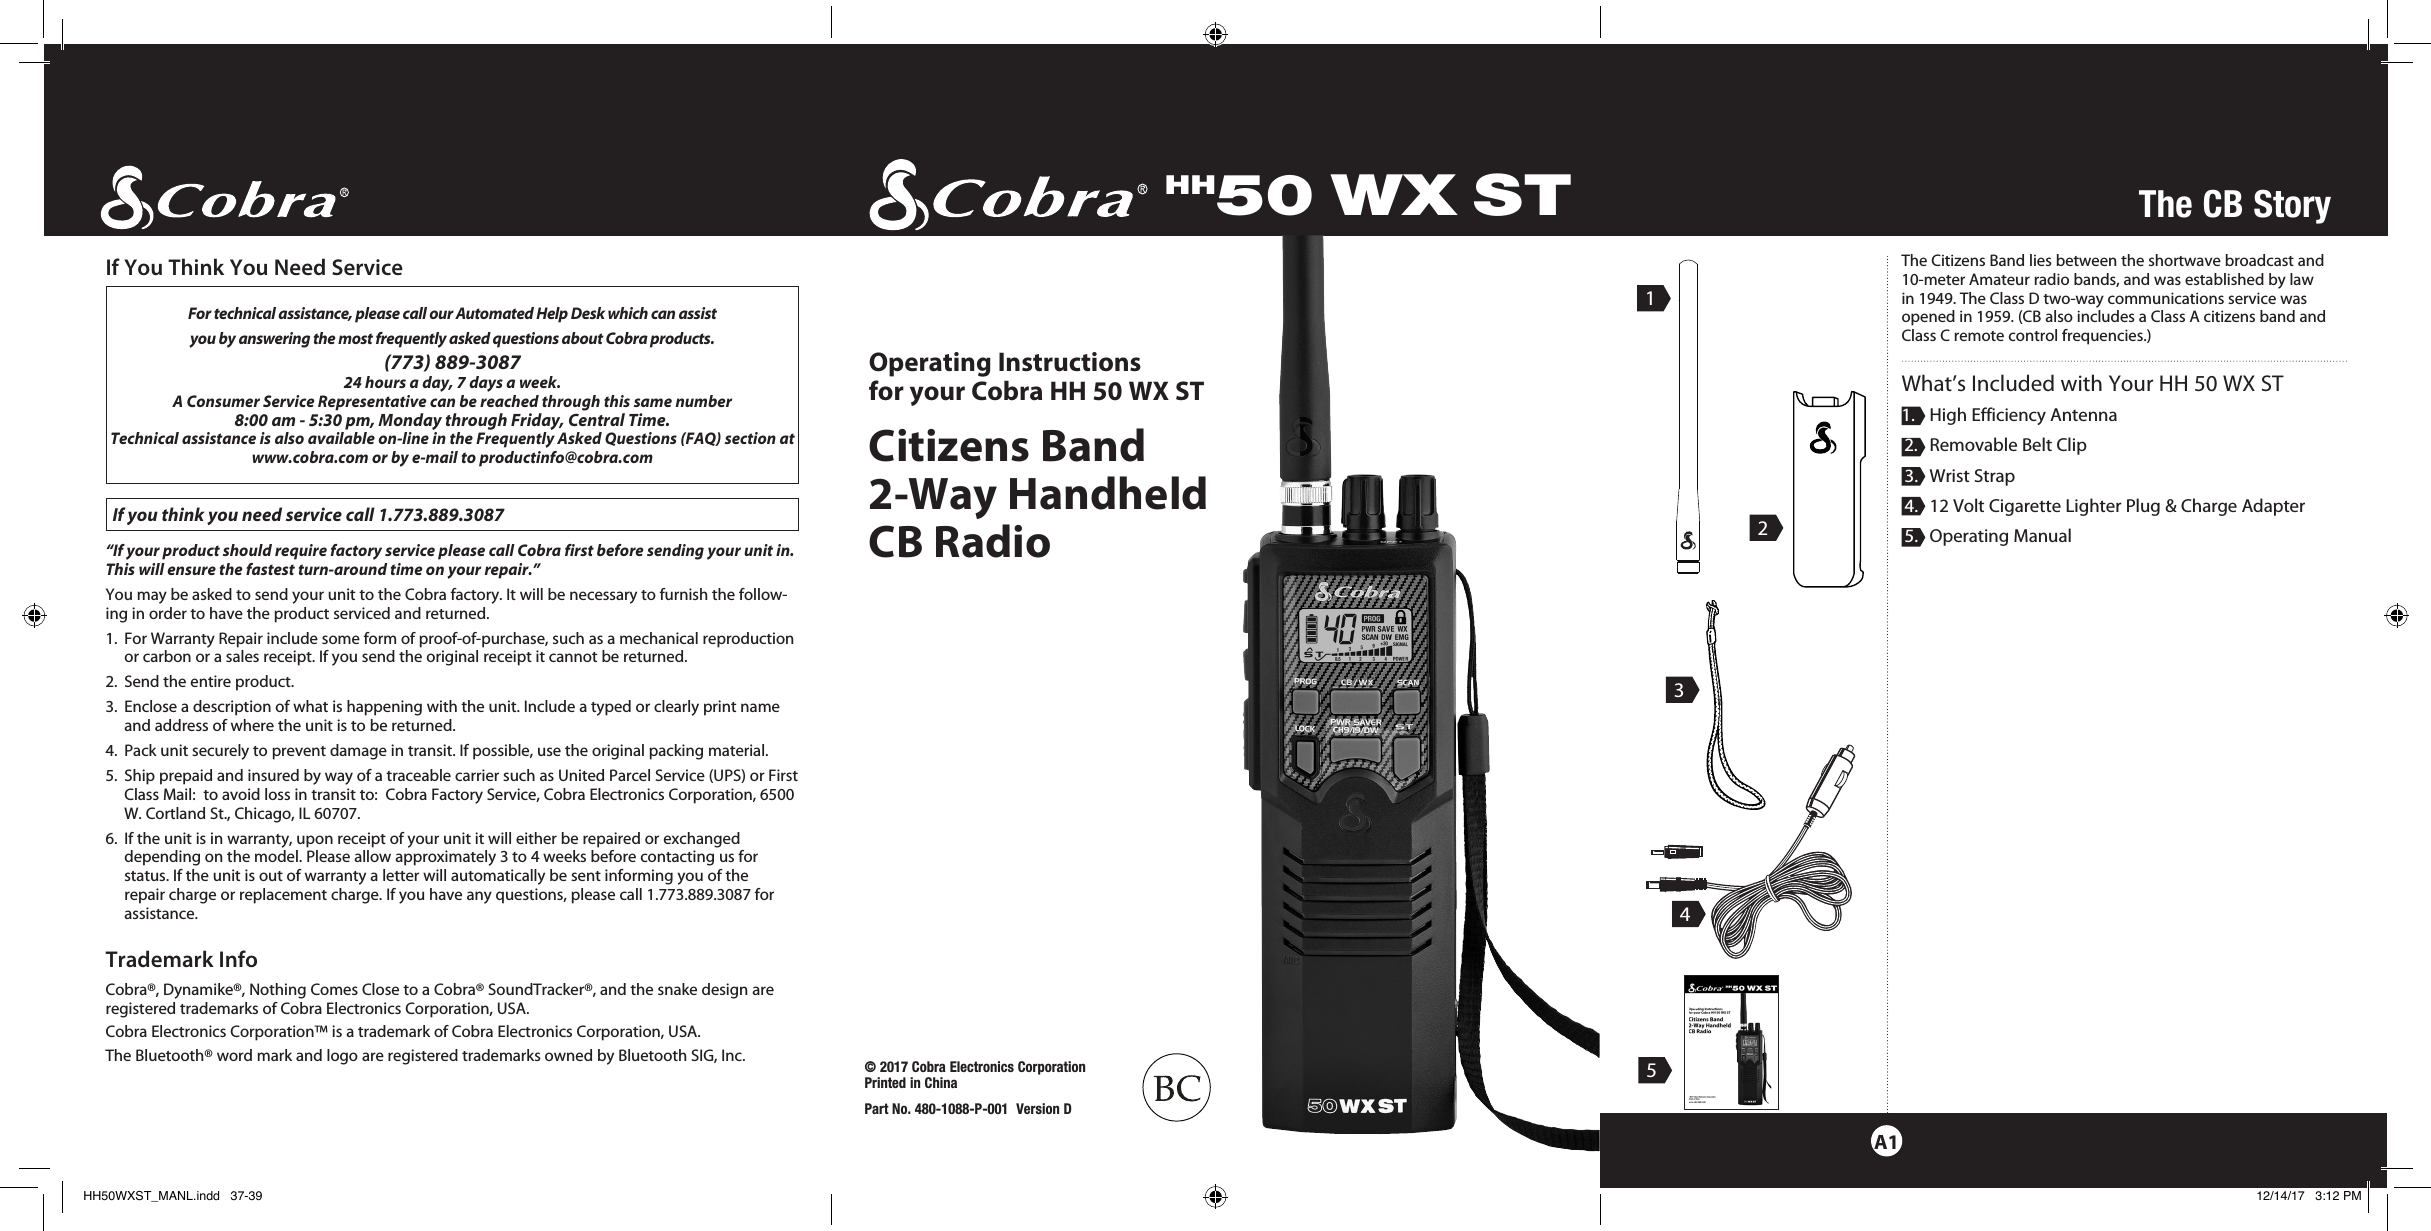 HH50 WX ST© 2017 Cobra Electronics Corporation Printed in ChinaPart No. 480-1088-P-001  Version DCitizens Band  2-Way Handheld  CB RadioOperating Instructions  for your Cobra HH 50 WX STThe CB StoryA132451For technical assistance, please call our Automated Help Desk which can assist you by answering the most frequently asked questions about Cobra products.(773) 889-3087  24 hours a day, 7 days a week.A Consumer Service Representative can be reached through this same number  8:00 am - 5:30 pm, Monday through Friday, Central Time.Technical assistance is also available on-line in the Frequently Asked Questions (FAQ) section at www.cobra.com or by e-mail to productinfo@cobra.com If you think you need service call 1.773.889.3087“If your product should require factory service please call Cobra first before sending your unit in.  This will ensure the fastest turn-around time on your repair.”  You may be asked to send your unit to the Cobra factory. It will be necessary to furnish the follow-ing in order to have the product serviced and returned.1.   For Warranty Repair include some form of proof-of-purchase, such as a mechanical reproduction or carbon or a sales receipt. If you send the original receipt it cannot be returned.2.  Send the entire product.3.    Enclose a description of what is happening with the unit. Include a typed or clearly print name and address of where the unit is to be returned.4.  Pack unit securely to prevent damage in transit. If possible, use the original packing material.5.   Ship prepaid and insured by way of a traceable carrier such as United Parcel Service (UPS) or First Class Mail:  to avoid loss in transit to:  Cobra Factory Service, Cobra Electronics Corporation, 6500 W. Cortland St., Chicago, IL 60707.6.   If the unit is in warranty, upon receipt of your unit it will either be repaired or exchanged depending on the model. Please allow approximately 3 to 4 weeks before contacting us for  status. If the unit is out of warranty a letter will automatically be sent informing you of the  repair charge or replacement charge. If you have any questions, please call 1.773.889.3087 for assistance.Trademark InfoCobra®, Dynamike®, Nothing Comes Close to a Cobra® SoundTracker®, and the snake design are registered trademarks of Cobra Electronics Corporation, USA.Cobra Electronics Corporation™ is a trademark of Cobra Electronics Corporation, USA.The Bluetooth® word mark and logo are registered trademarks owned by Bluetooth SIG, Inc.If You Think You Need Service The Citizens Band lies between the shortwave broadcast and 10-meter Amateur radio bands, and was established by law in 1949. The Class D two-way communications service was opened in 1959. (CB also includes a Class A citizens band and Class C remote control frequencies.)What’s Included with Your HH 50 WX ST1.   High Efficiency Antenna 2.   Removable Belt Clip 3.  Wrist Strap 4.   12 Volt Cigarette Lighter Plug &amp; Charge Adapter 5.  Operating ManualHH50WXST_MANL.indd   37-39 12/14/17   3:12 PM